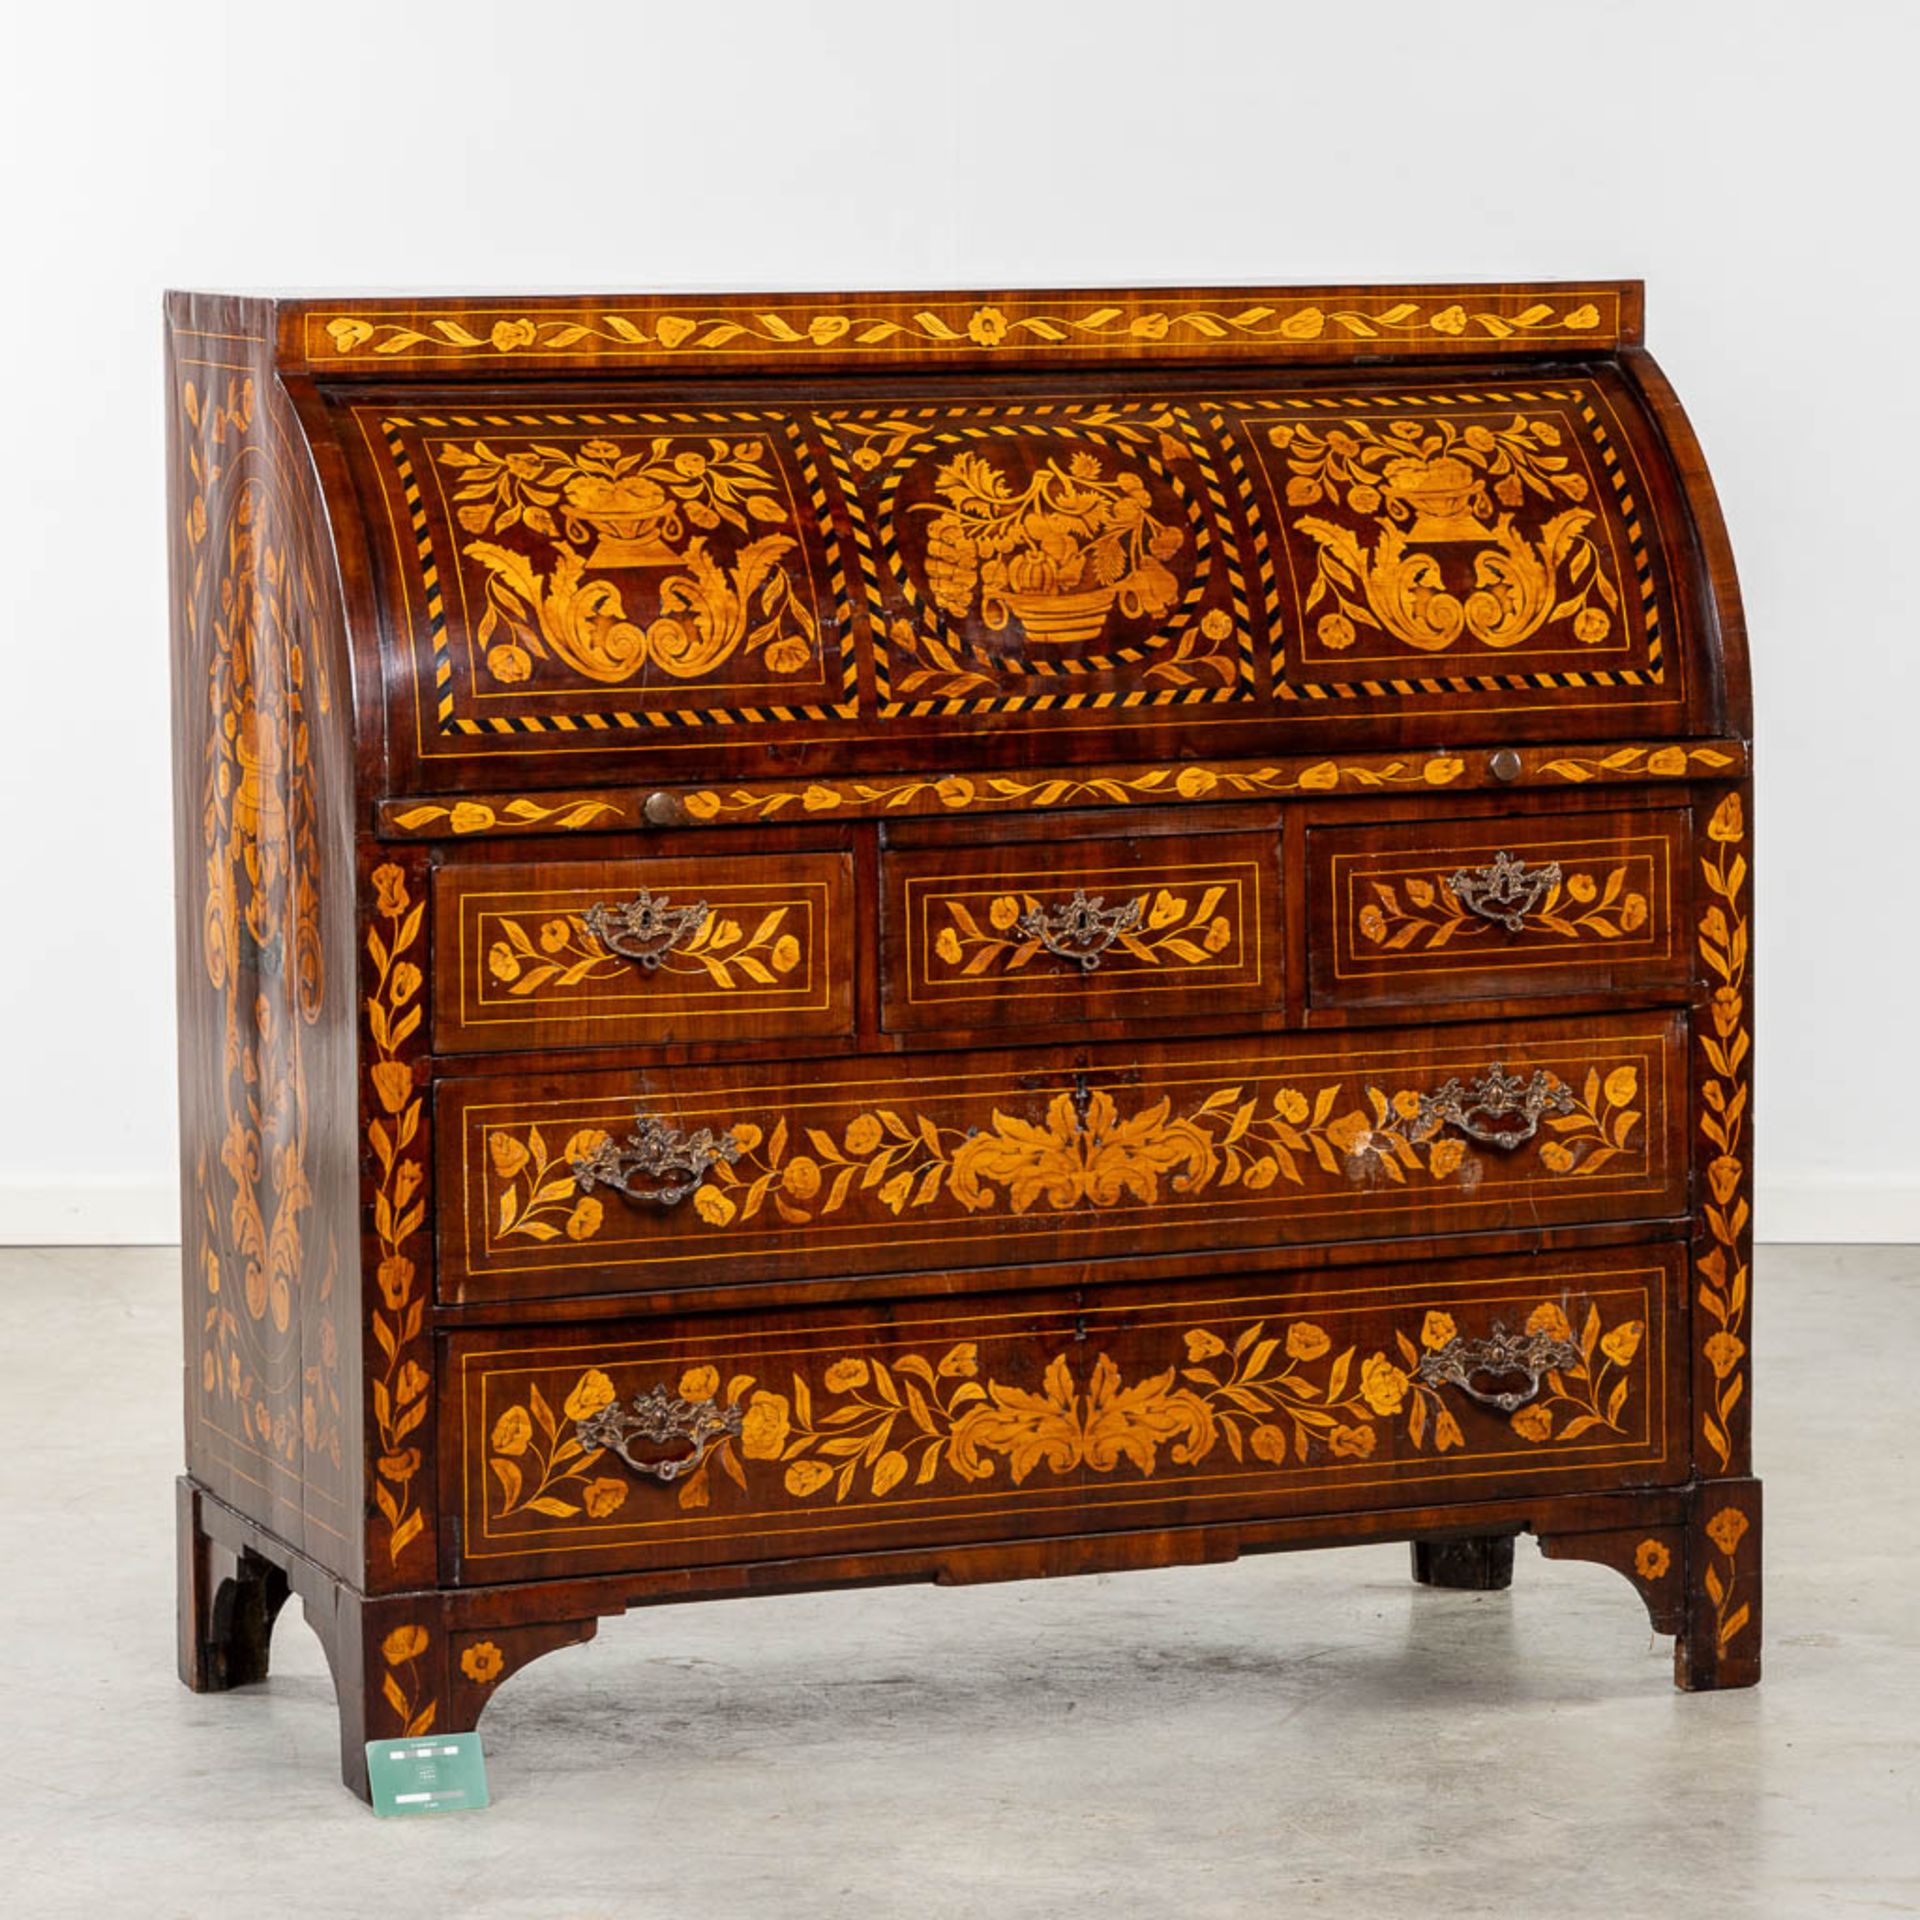 A fine marquetry inlay secretaire cabinet, The Netherlands, 18th C. (L:51 x W:112 x H:108 cm) - Image 2 of 20